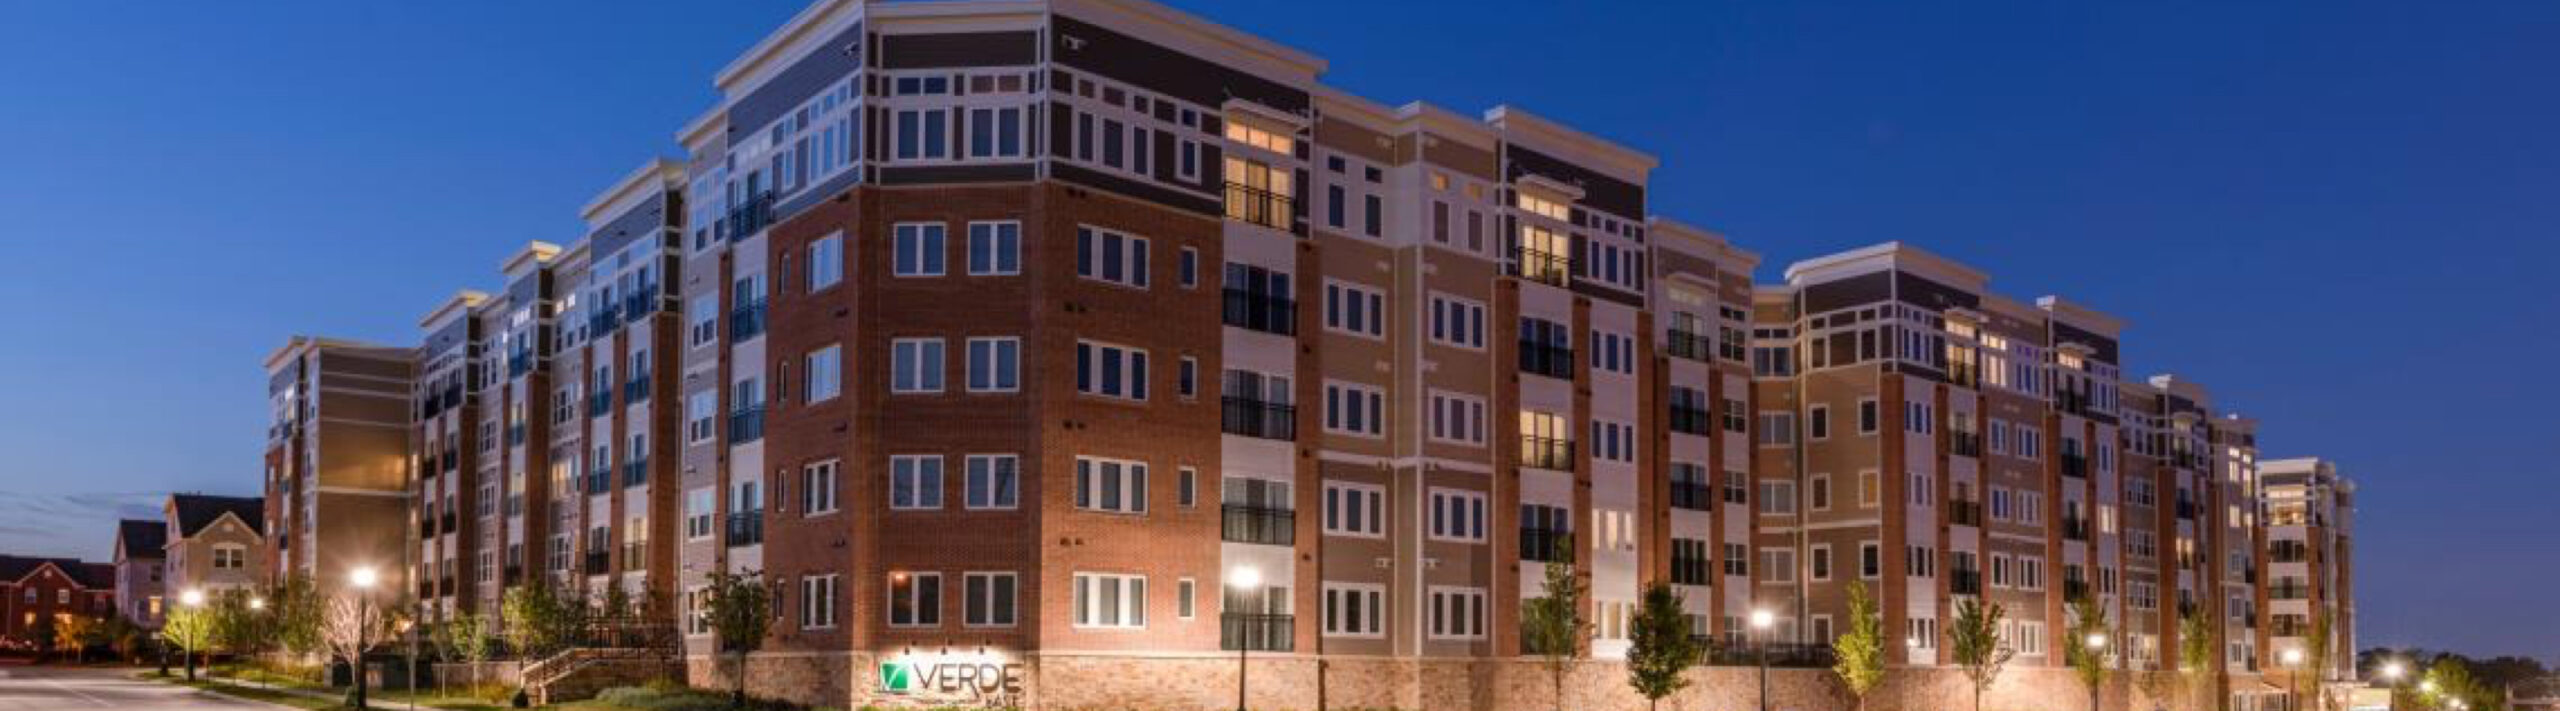 View of the Verde Apartments building that Dolben manages in Maryland